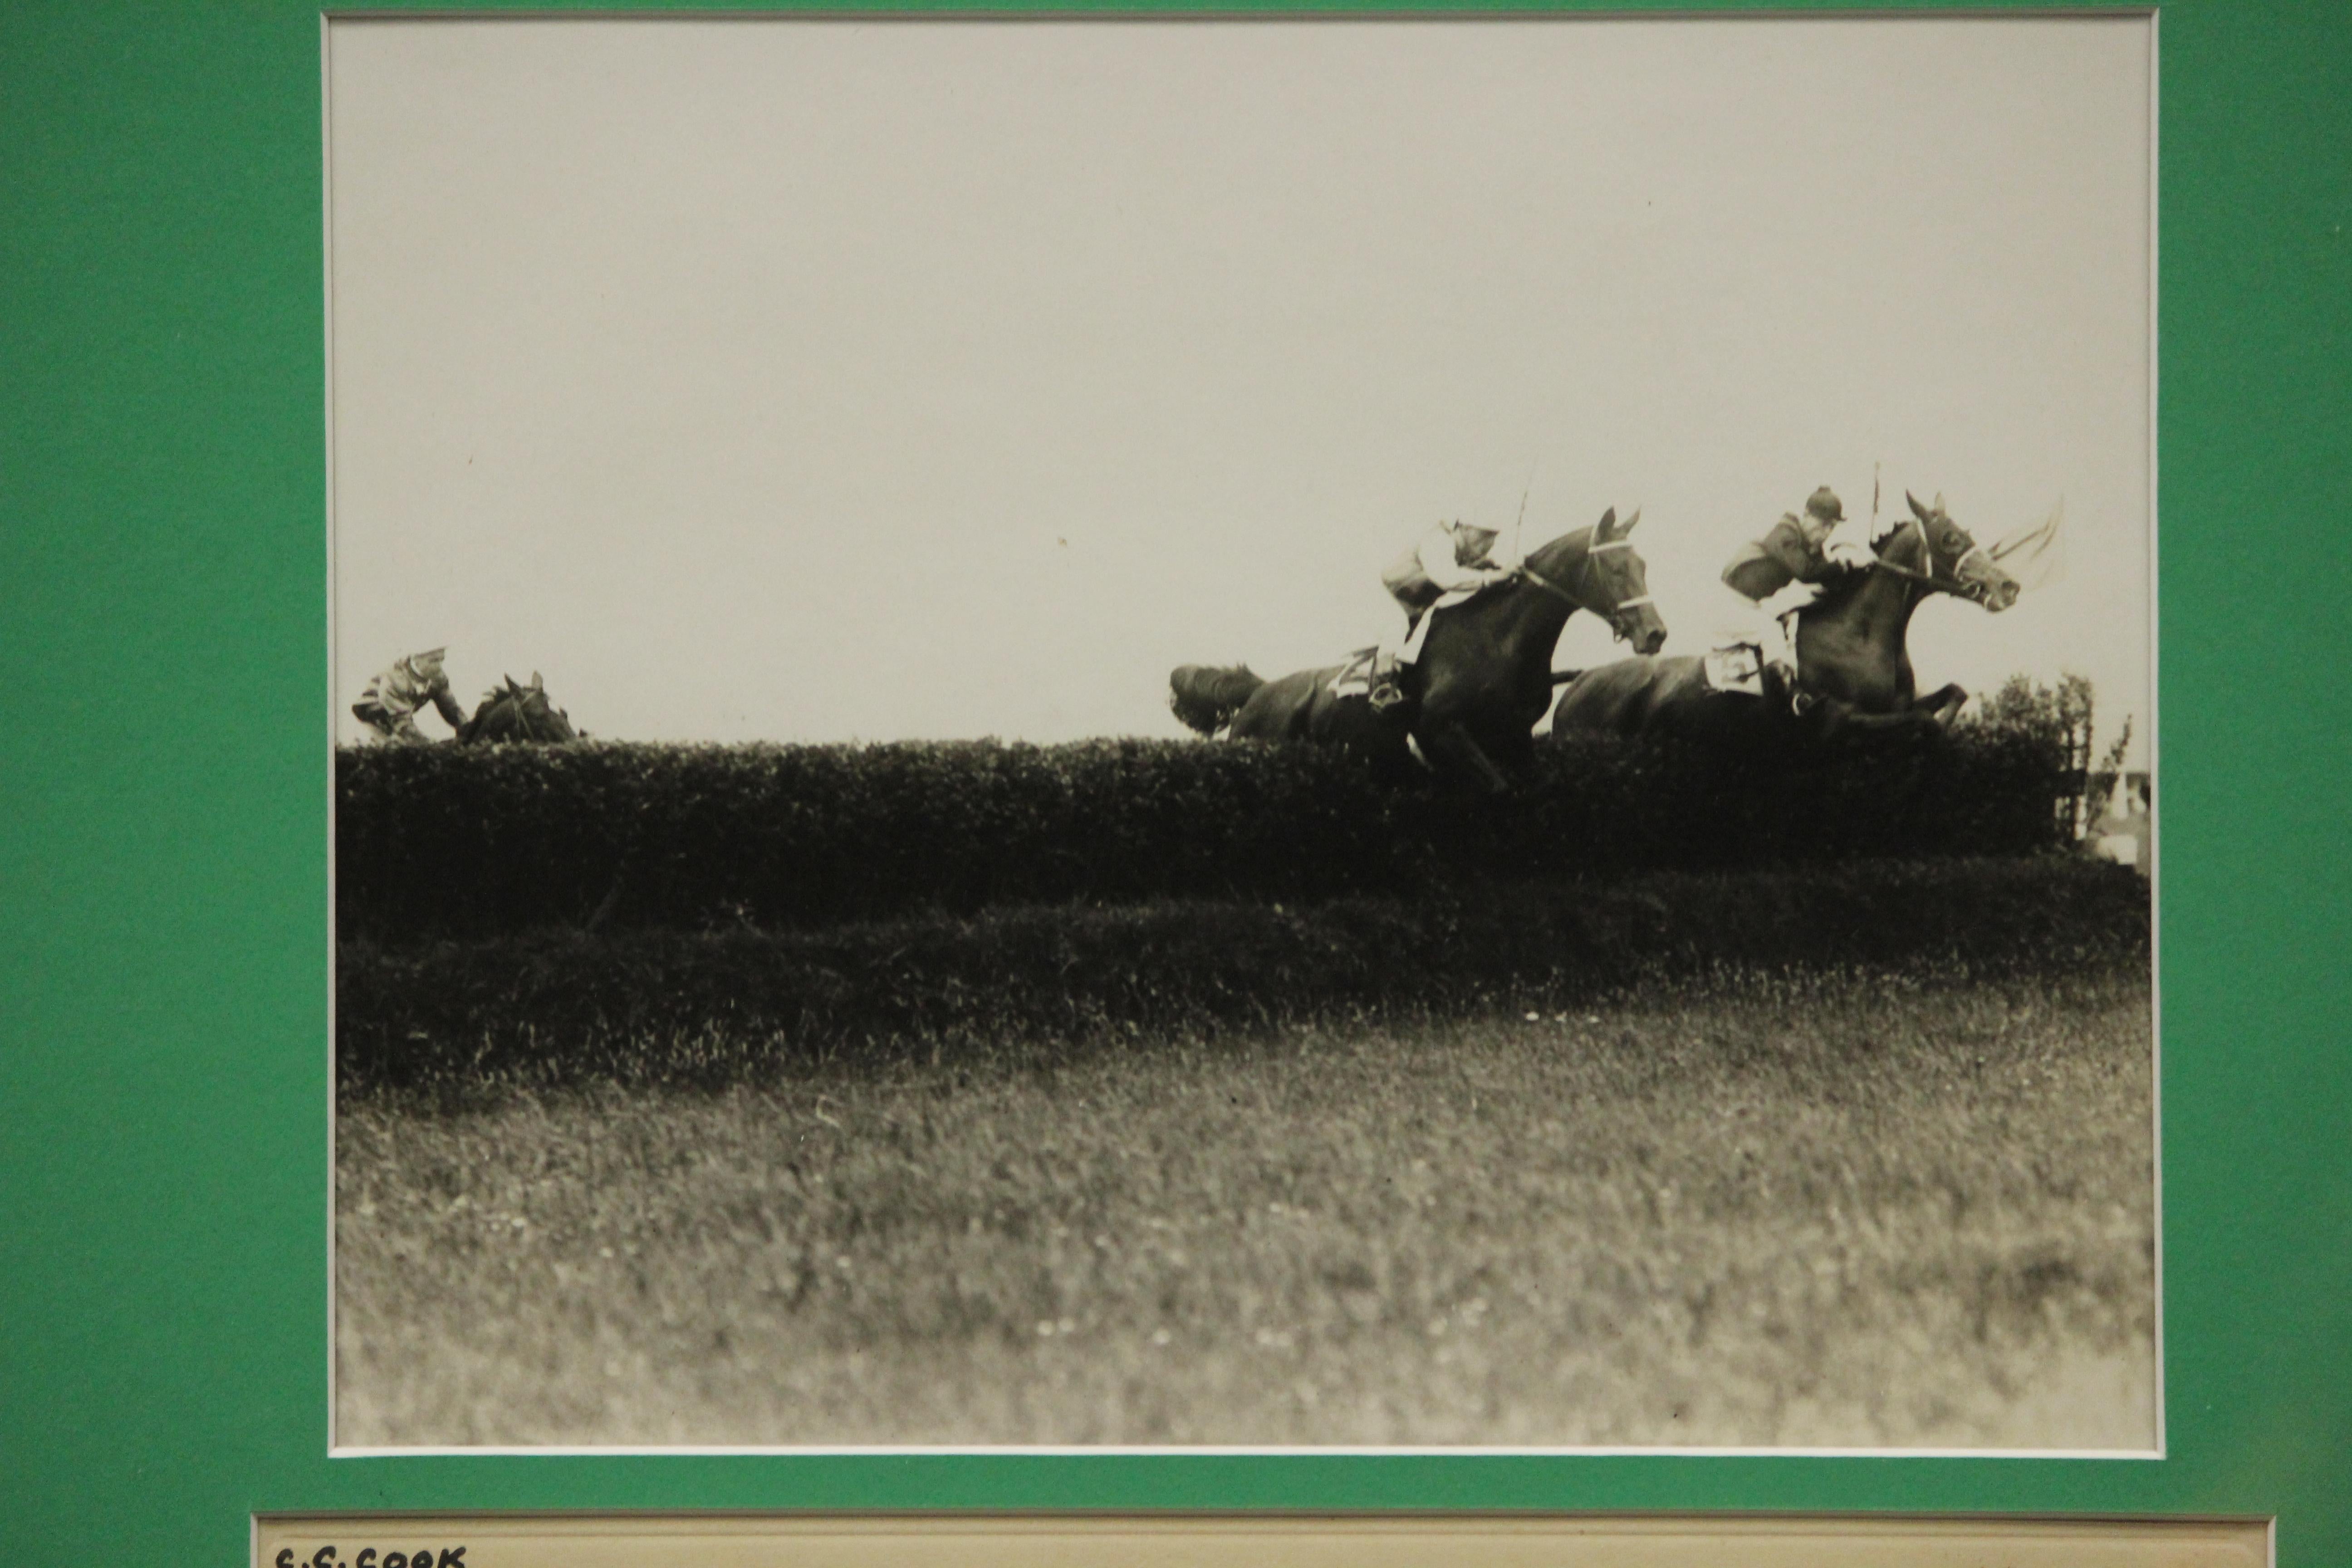 B&W photo of a steeplechase race at Aqueduct Racetrack dated June 30th 1928

Photo Sz: 7 1/2